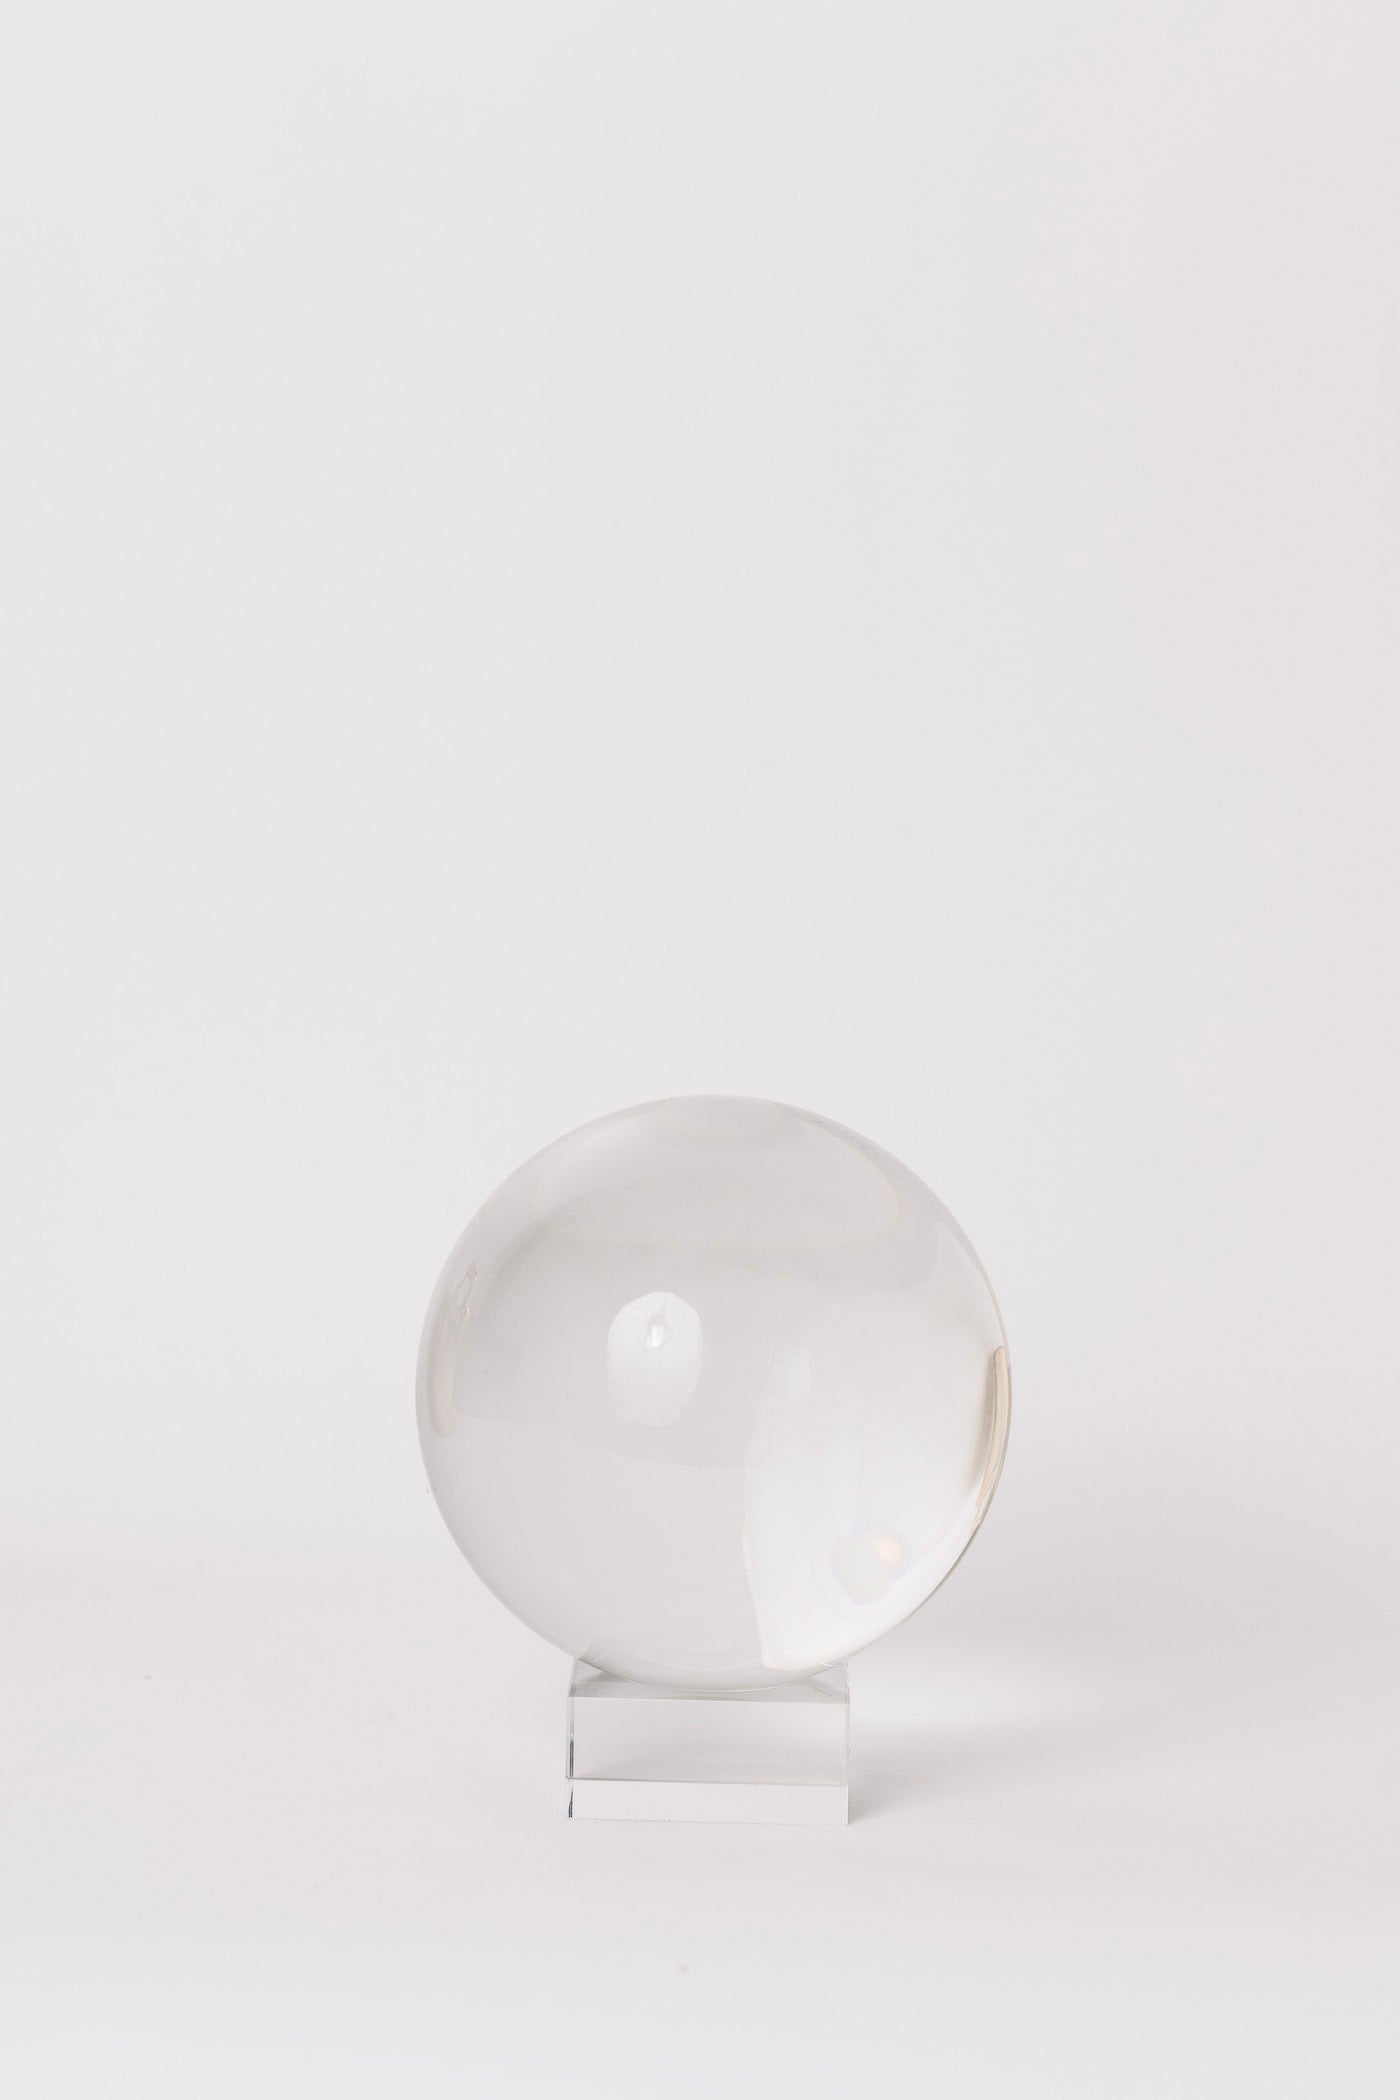 Charmed Crystal Ball - 3 Sizes